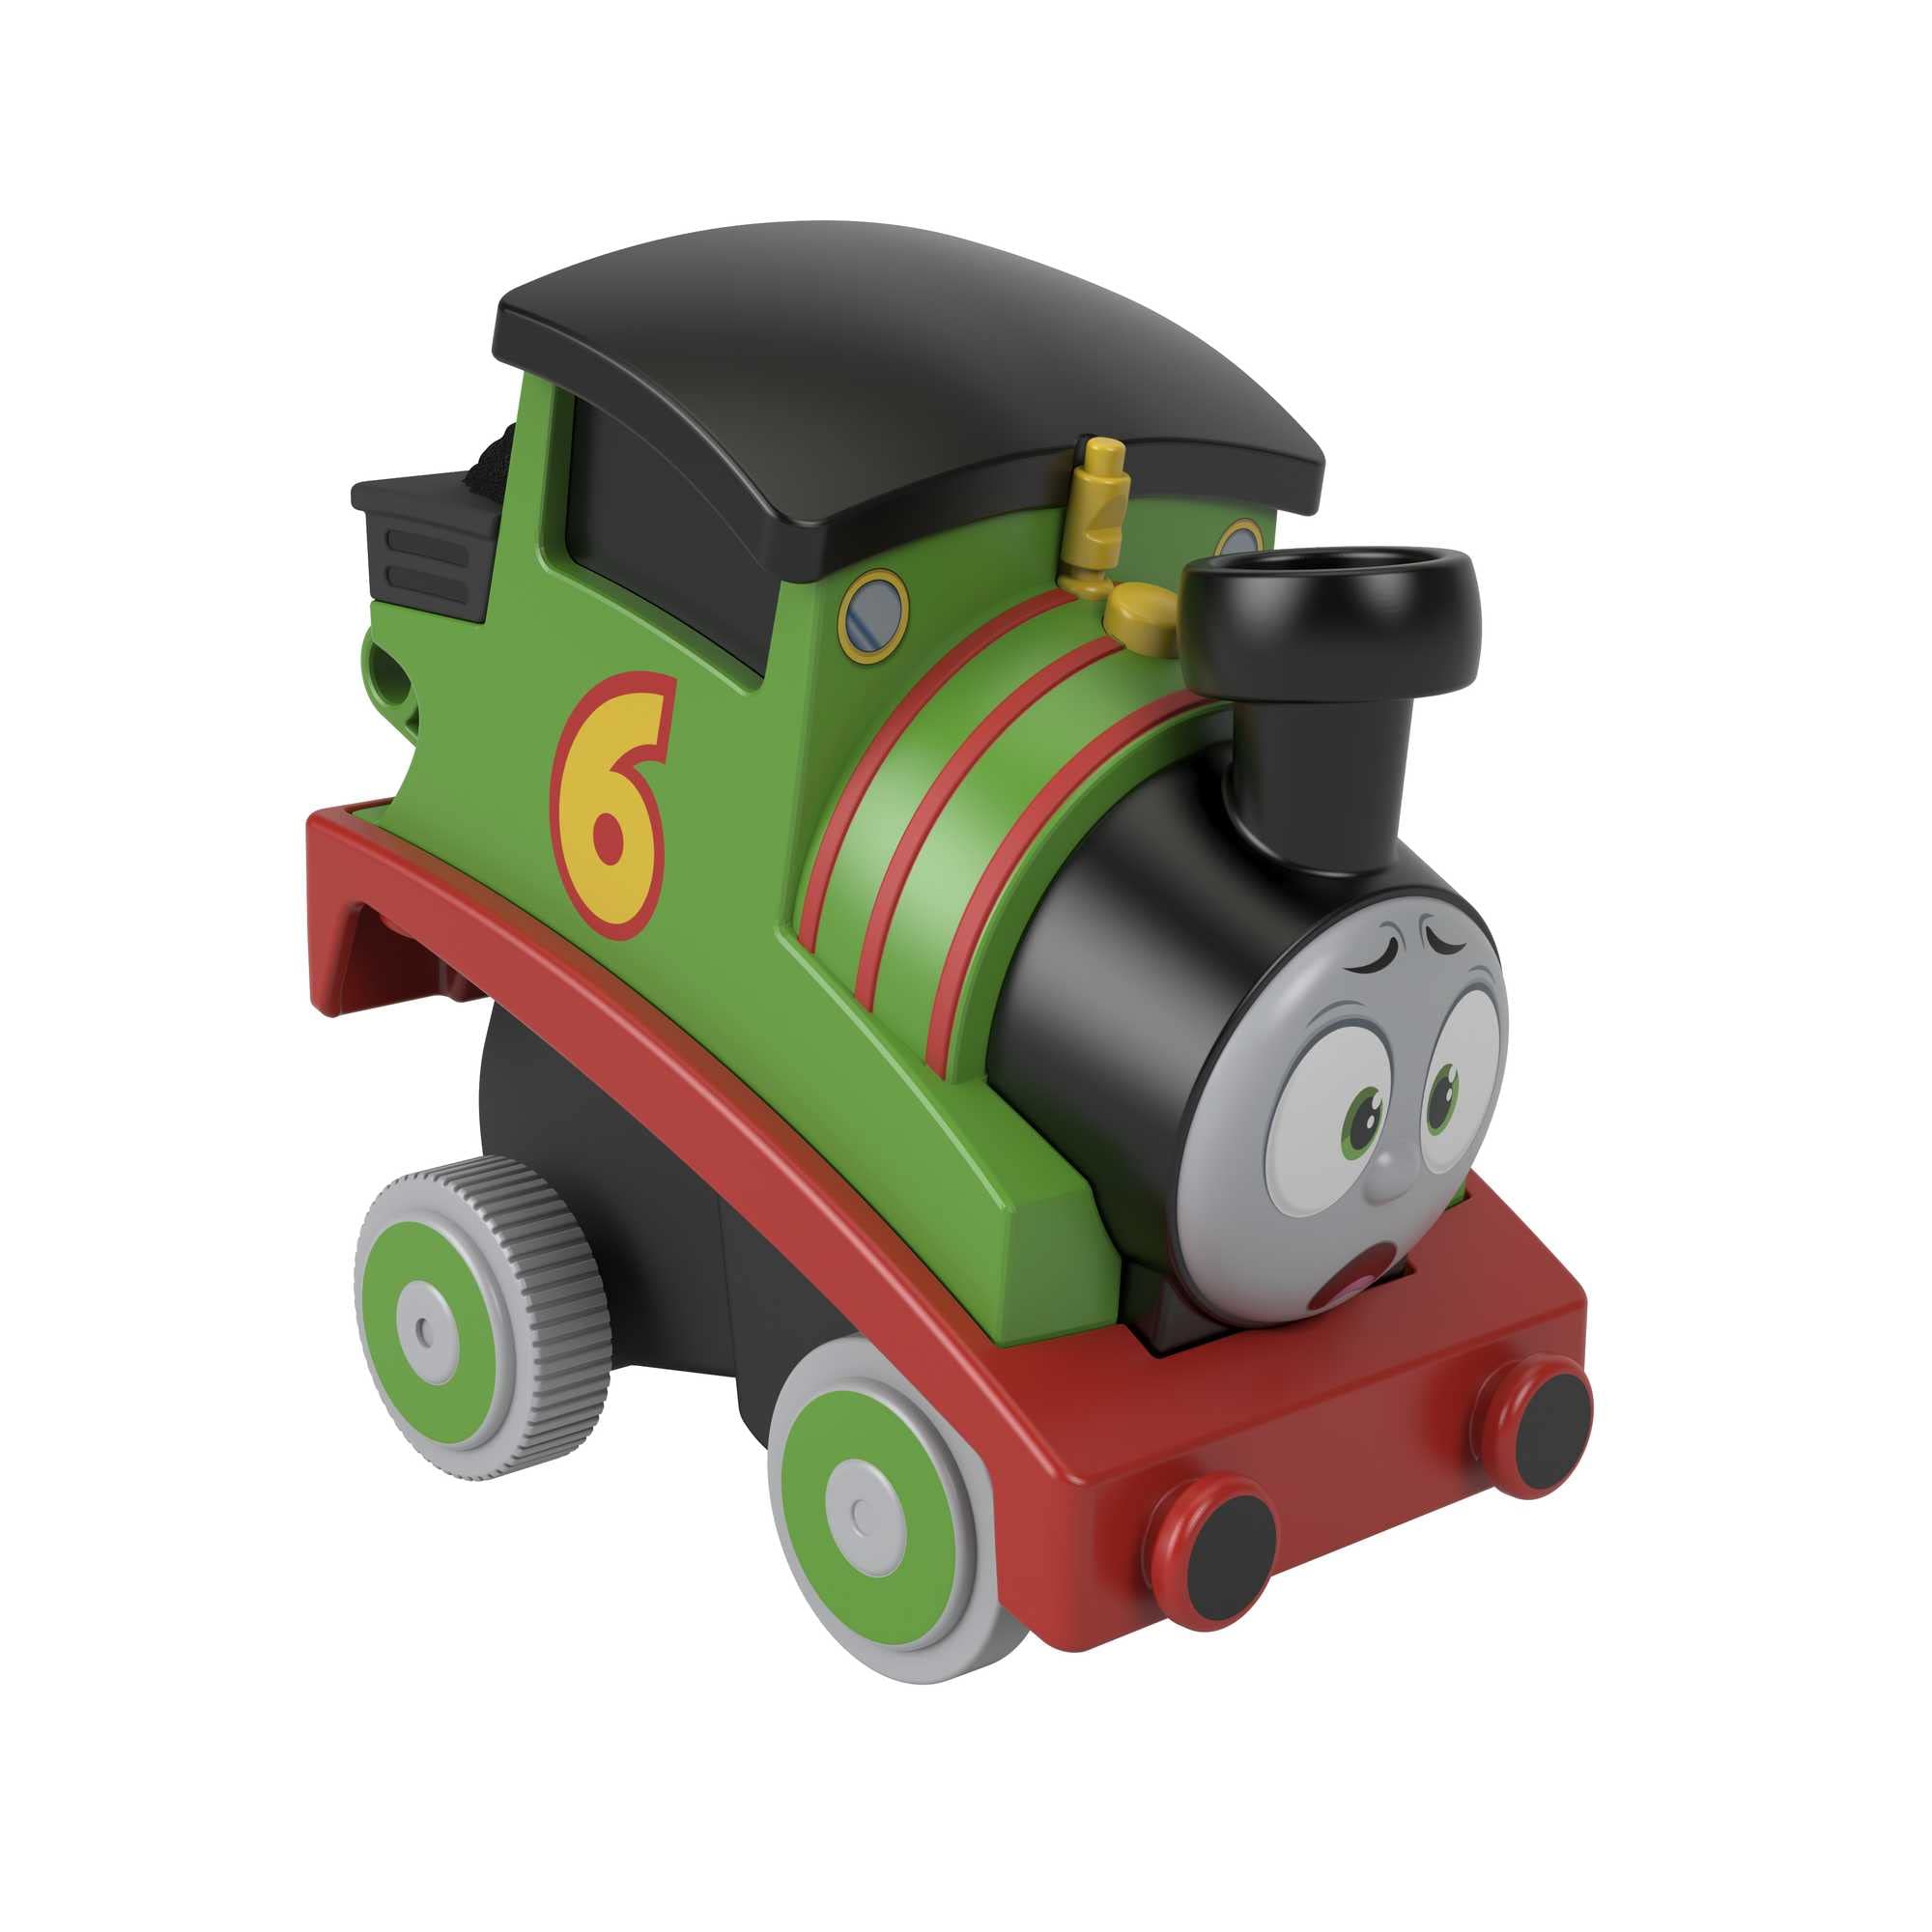 Thomas & Friends Racing Toy Train, Press 'N Go Stunt Percy Engine For Toddler & Preschool Pretend Play Ages 2+ Years